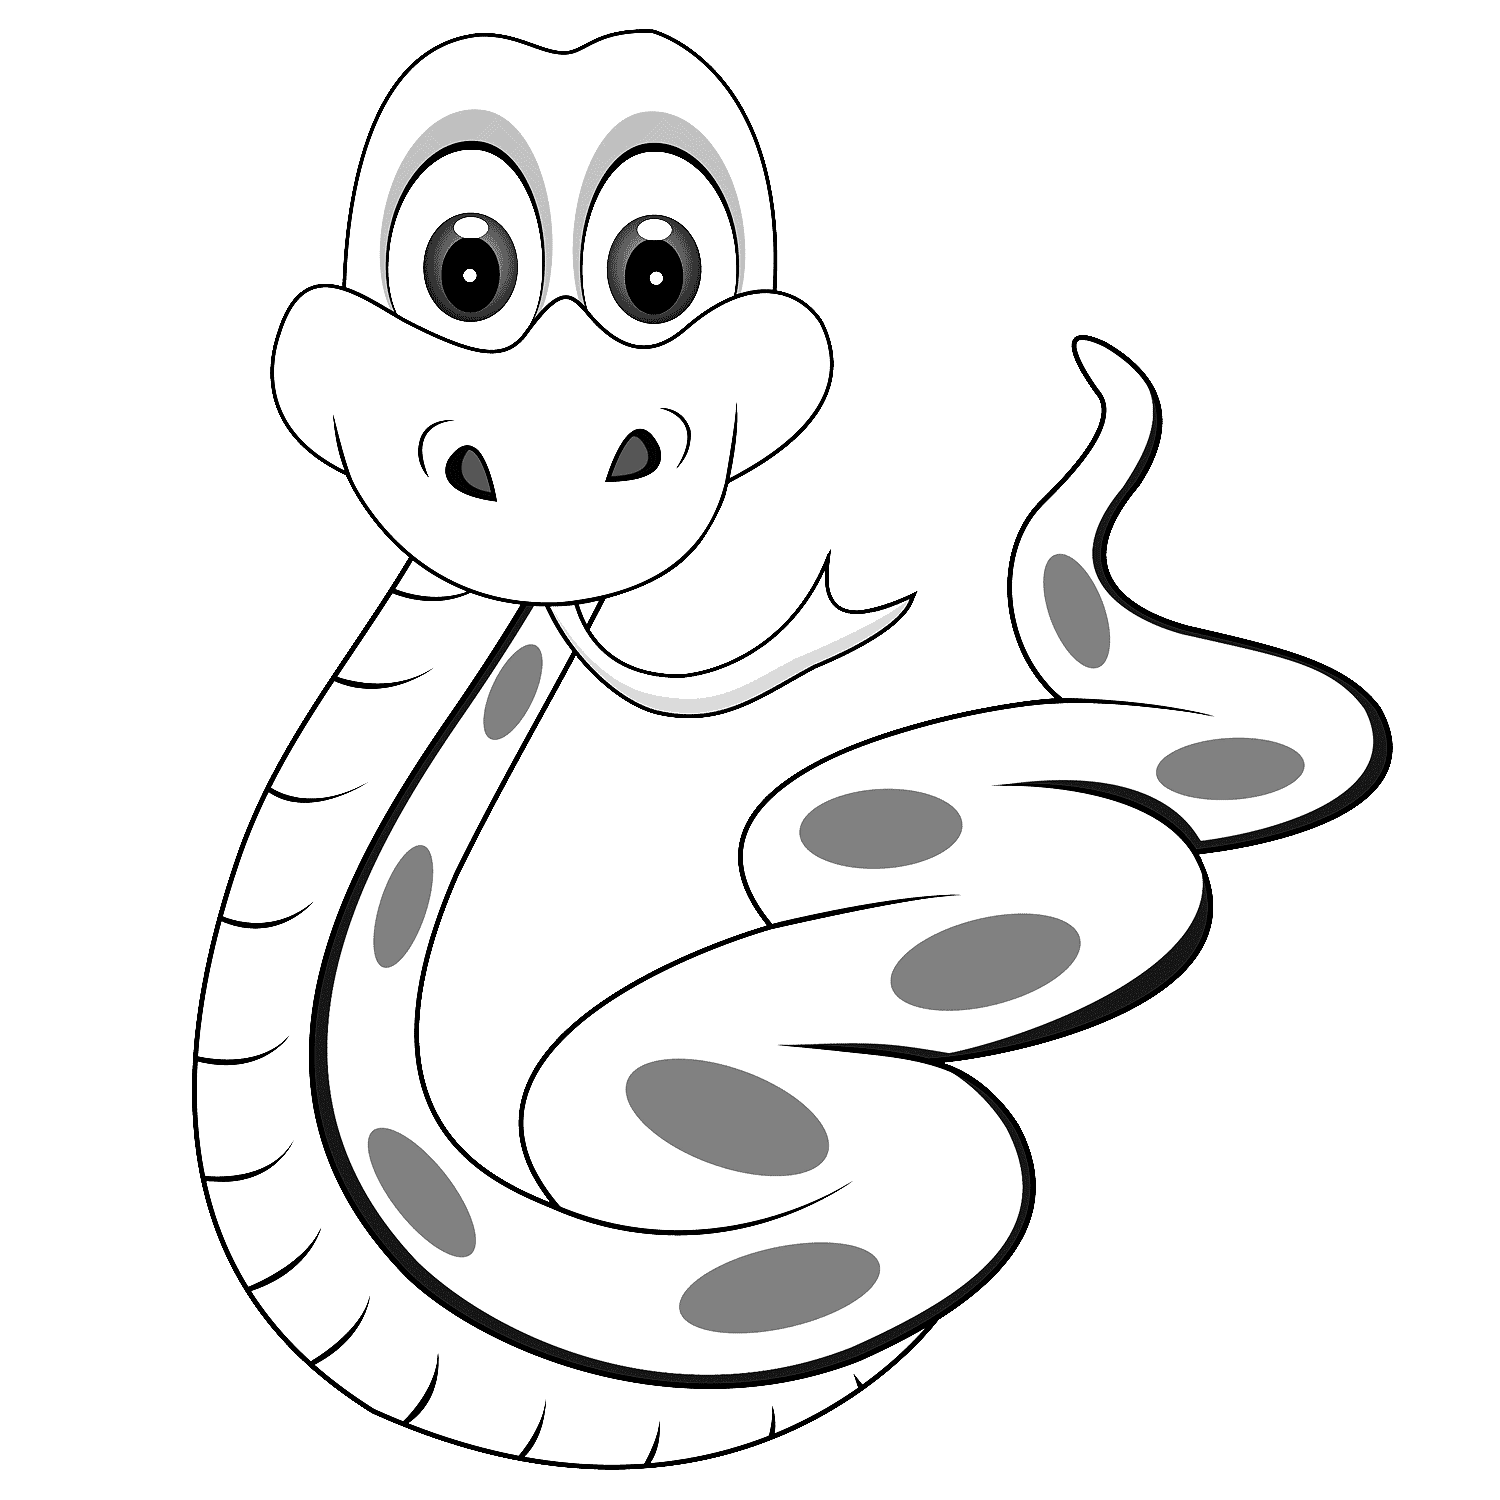 Coloring Pages: Snakes Coloring Pages Free and Printable